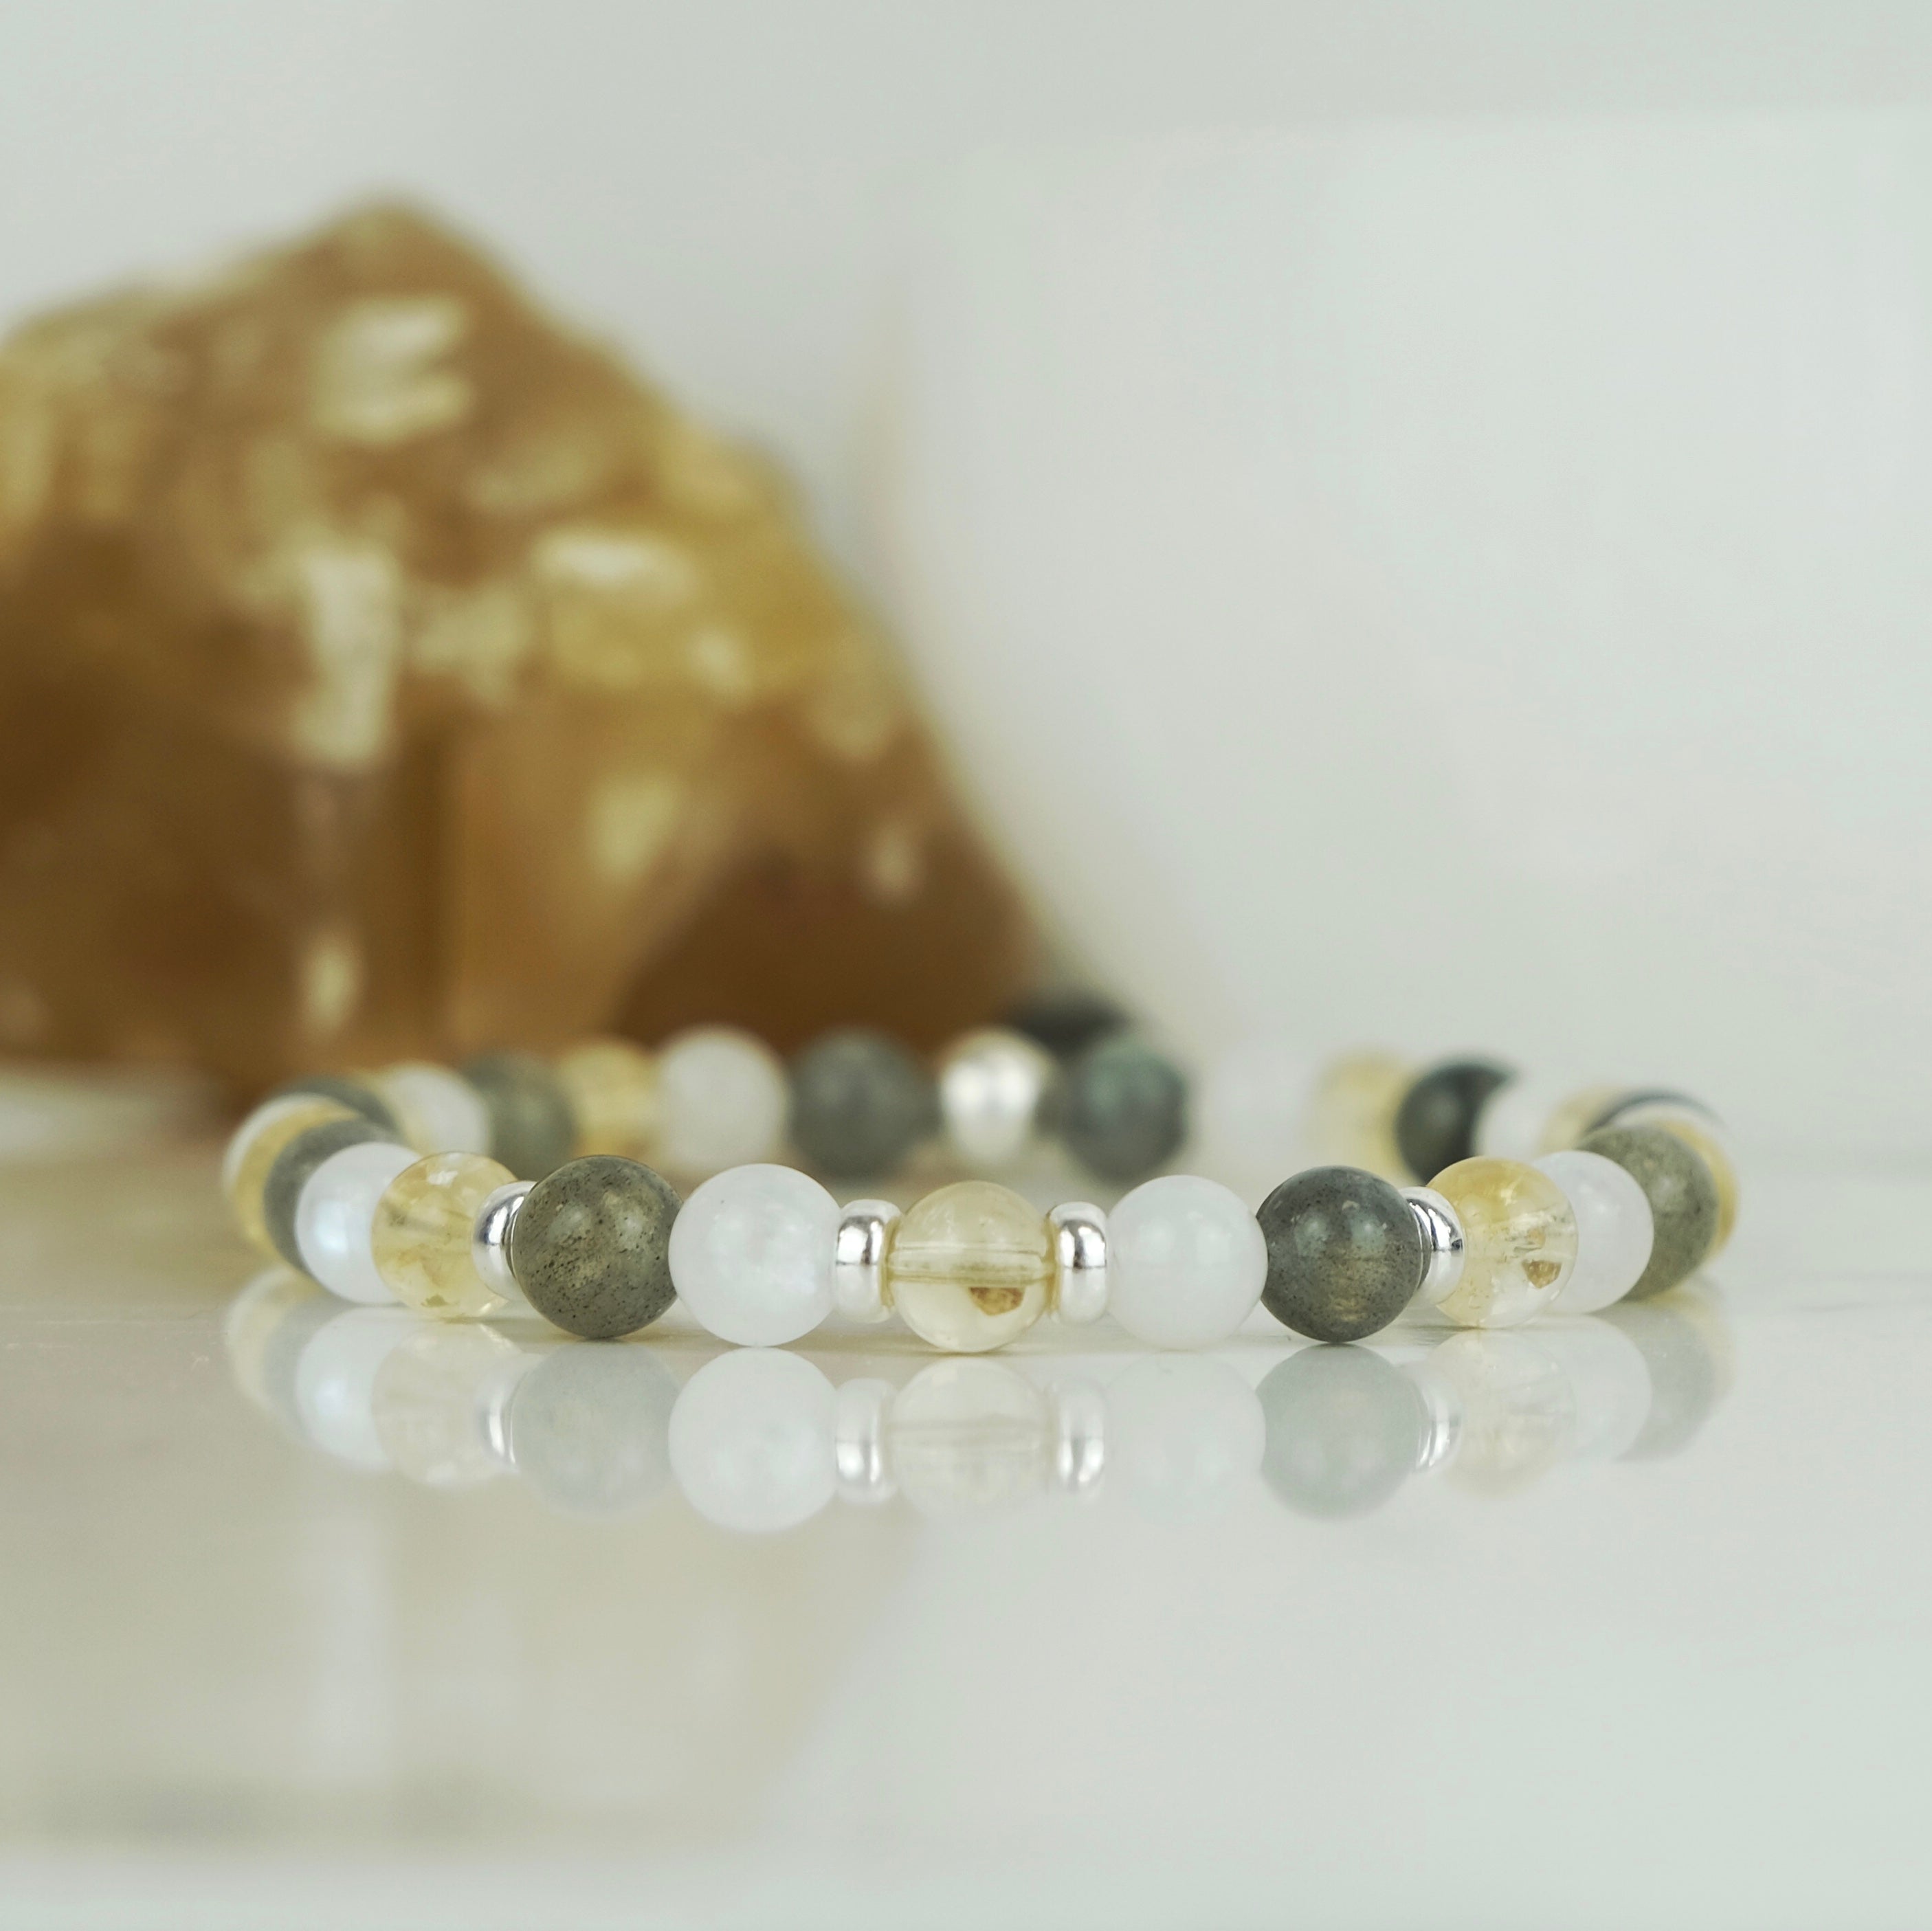 A citrine, labradorite and moonstone gemstone bracelet in 6mm beads with silver accessories